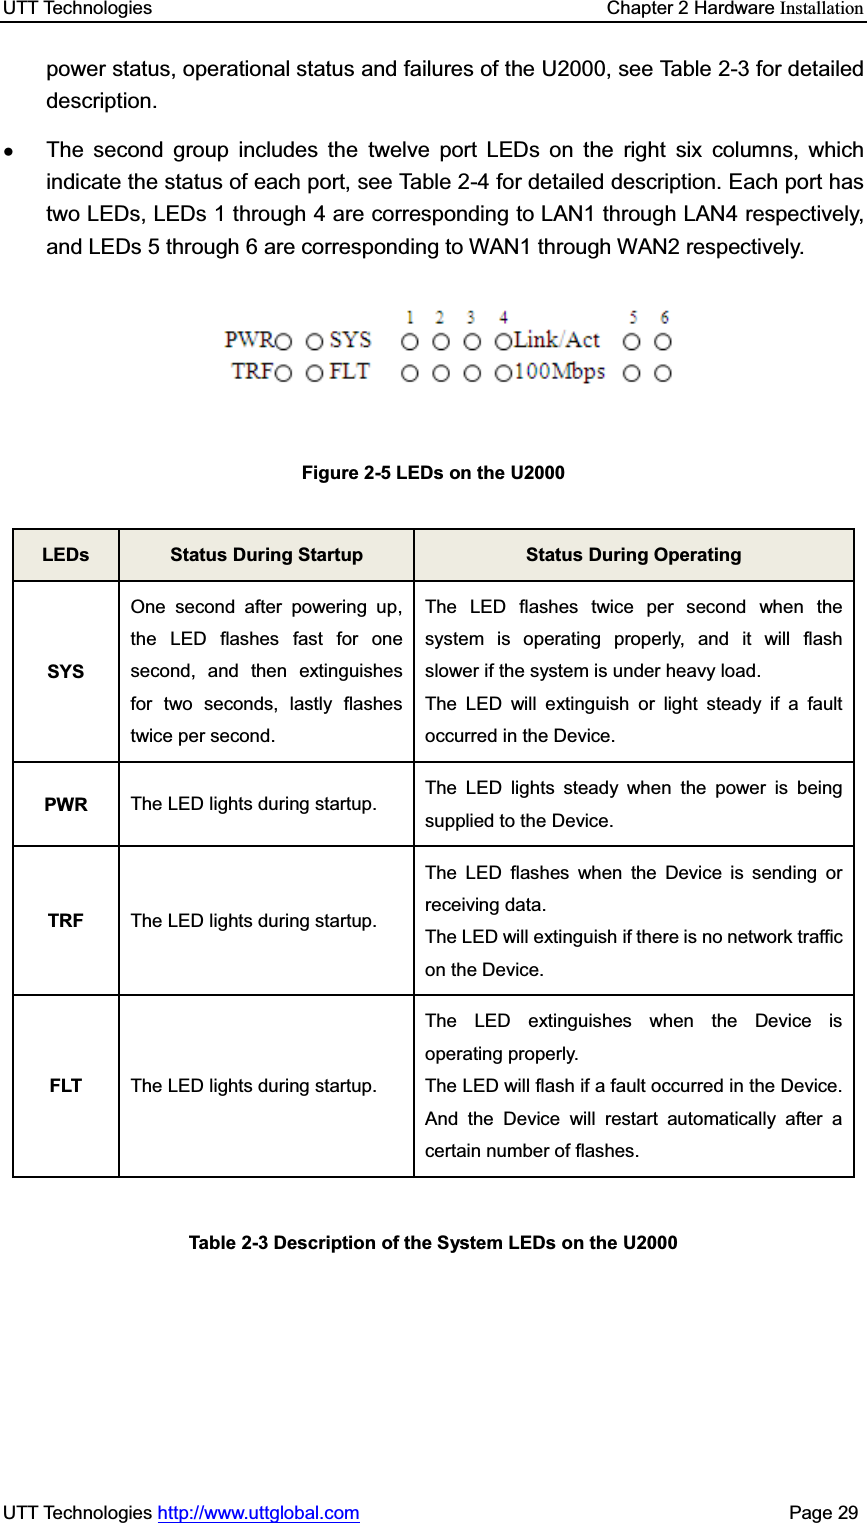 UTT Technologies    Chapter 2 Hardware InstallationUTT Technologies http://www.uttglobal.com                                              Page 29 power status, operational status and failures of the U2000, see Table 2-3 for detailed description.  ƔThe second group includes the twelve port LEDs on the right six columns, which indicate the status of each port, see Table 2-4 for detailed description. Each port has two LEDs, LEDs 1 through 4 are corresponding to LAN1 through LAN4 respectively, and LEDs 5 through 6 are corresponding to WAN1 through WAN2 respectively. Figure 2-5 LEDs on the U2000 LEDs Status During Startup  Status During Operating SYSOne second after powering up,  the LED flashes fast for one second, and then extinguishes for two seconds, lastly flashes twice per second. The LED flashes twice per second when the system is operating properly, and it will flash slower if the system is under heavy load. The LED will extinguish or light steady if a fault occurred in the Device. PWR The LED lights during startup.  The LED lights steady when the power is being supplied to the Device. TRF The LED lights during startup. The LED flashes when the Device is sending or receiving data. The LED will extinguish if there is no network traffic on the Device.   FLT  The LED lights during startup. The LED extinguishes when the Device is operating properly. The LED will flash if a fault occurred in the Device. And the Device will restart automatically after a certain number of flashes. Table 2-3 Description of the System LEDs on the U2000 